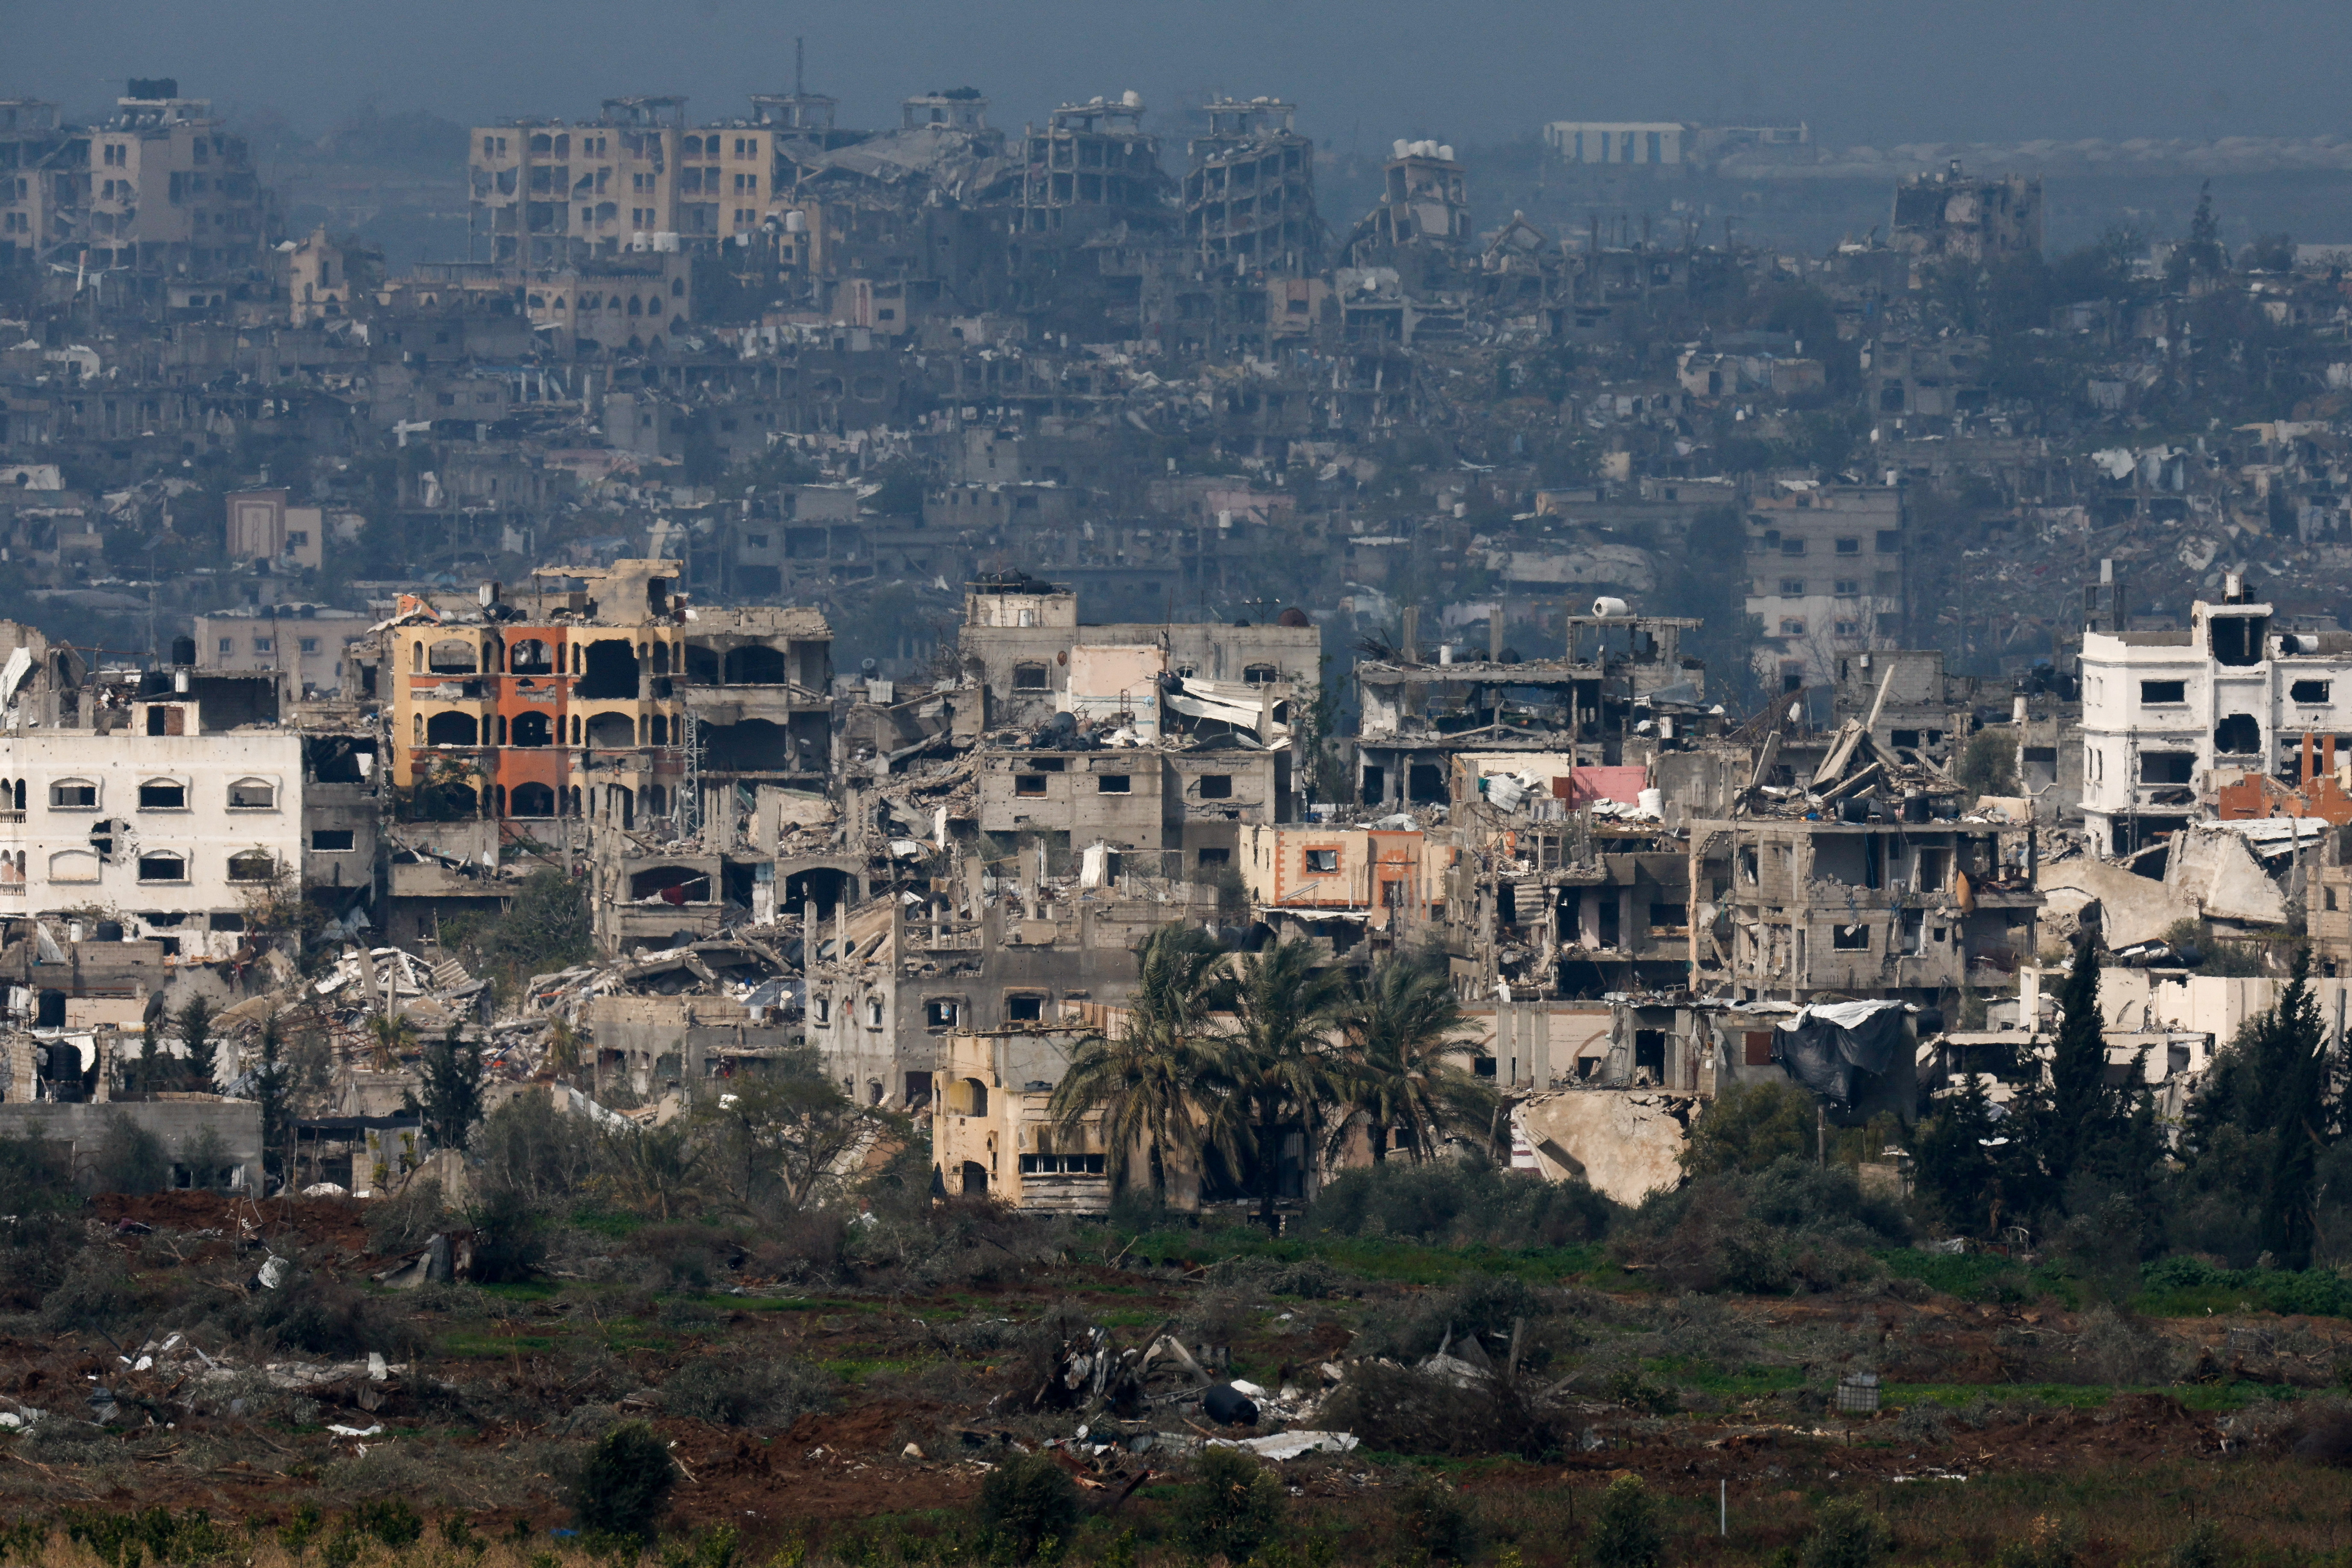 Damaged houses lie in ruin in Gaza, amid the ongoing conflict between Israel and the Palestinian Islamist group Hamas, as seen from Israel./Amir Cohen/Reuters